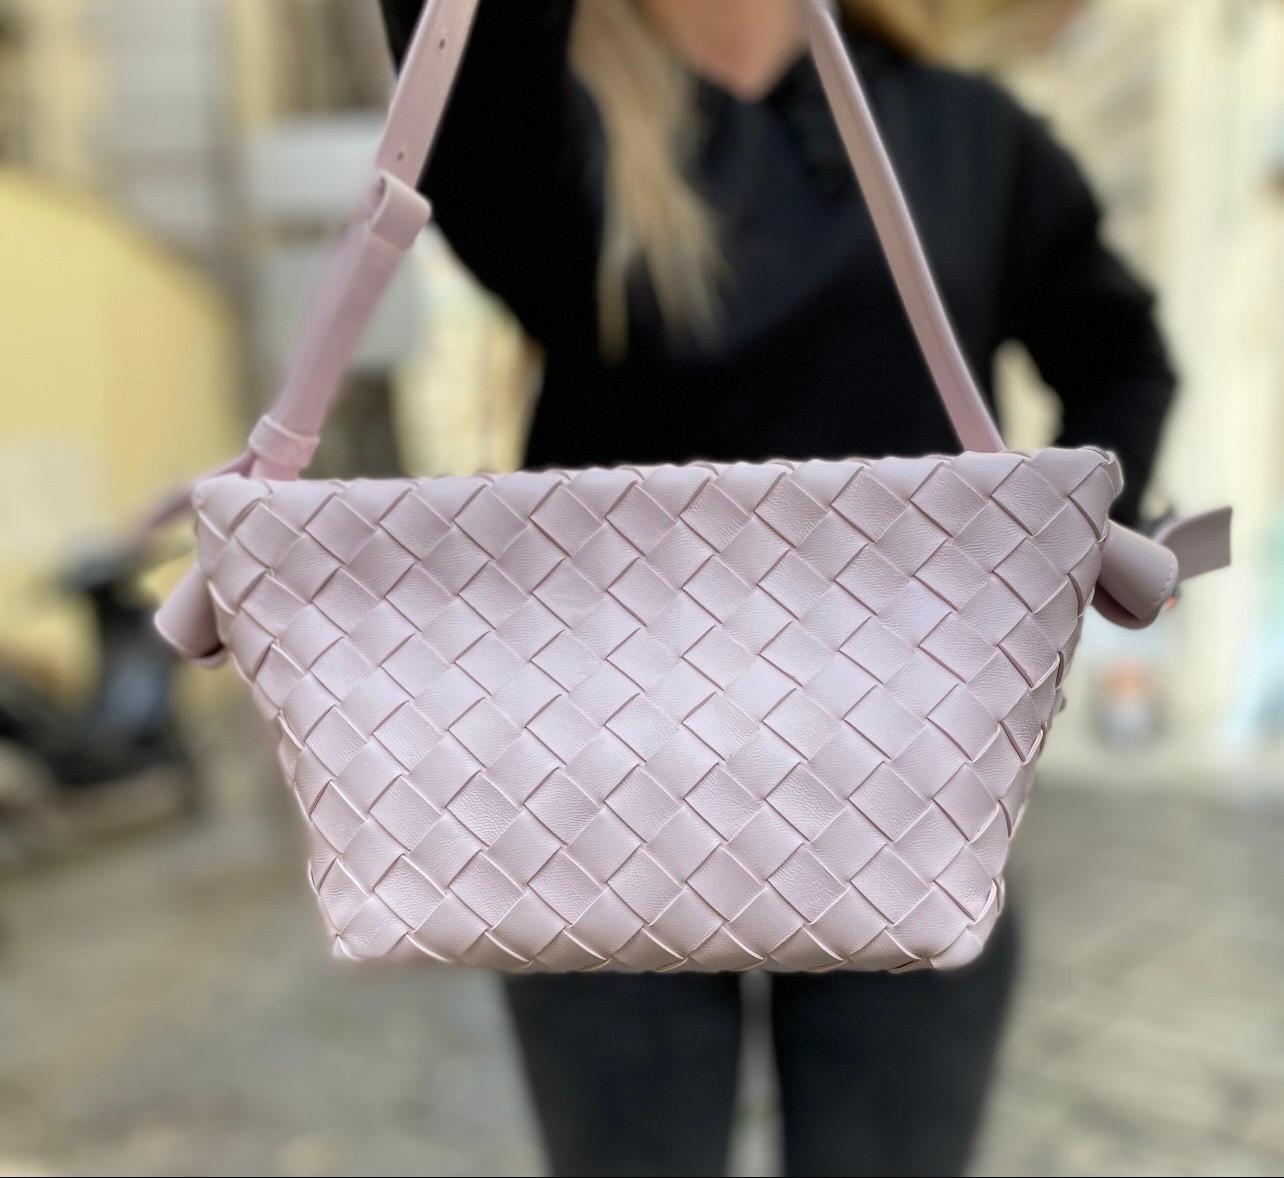 Bag signed Bottega Veneta, Tie model, made of intertwined lambskin with golden hardware.  Equipped with a magnetic closure, internally lined in leather, roomy for the essentials.  Equipped with a smooth adjustable leather handle. Equipped with